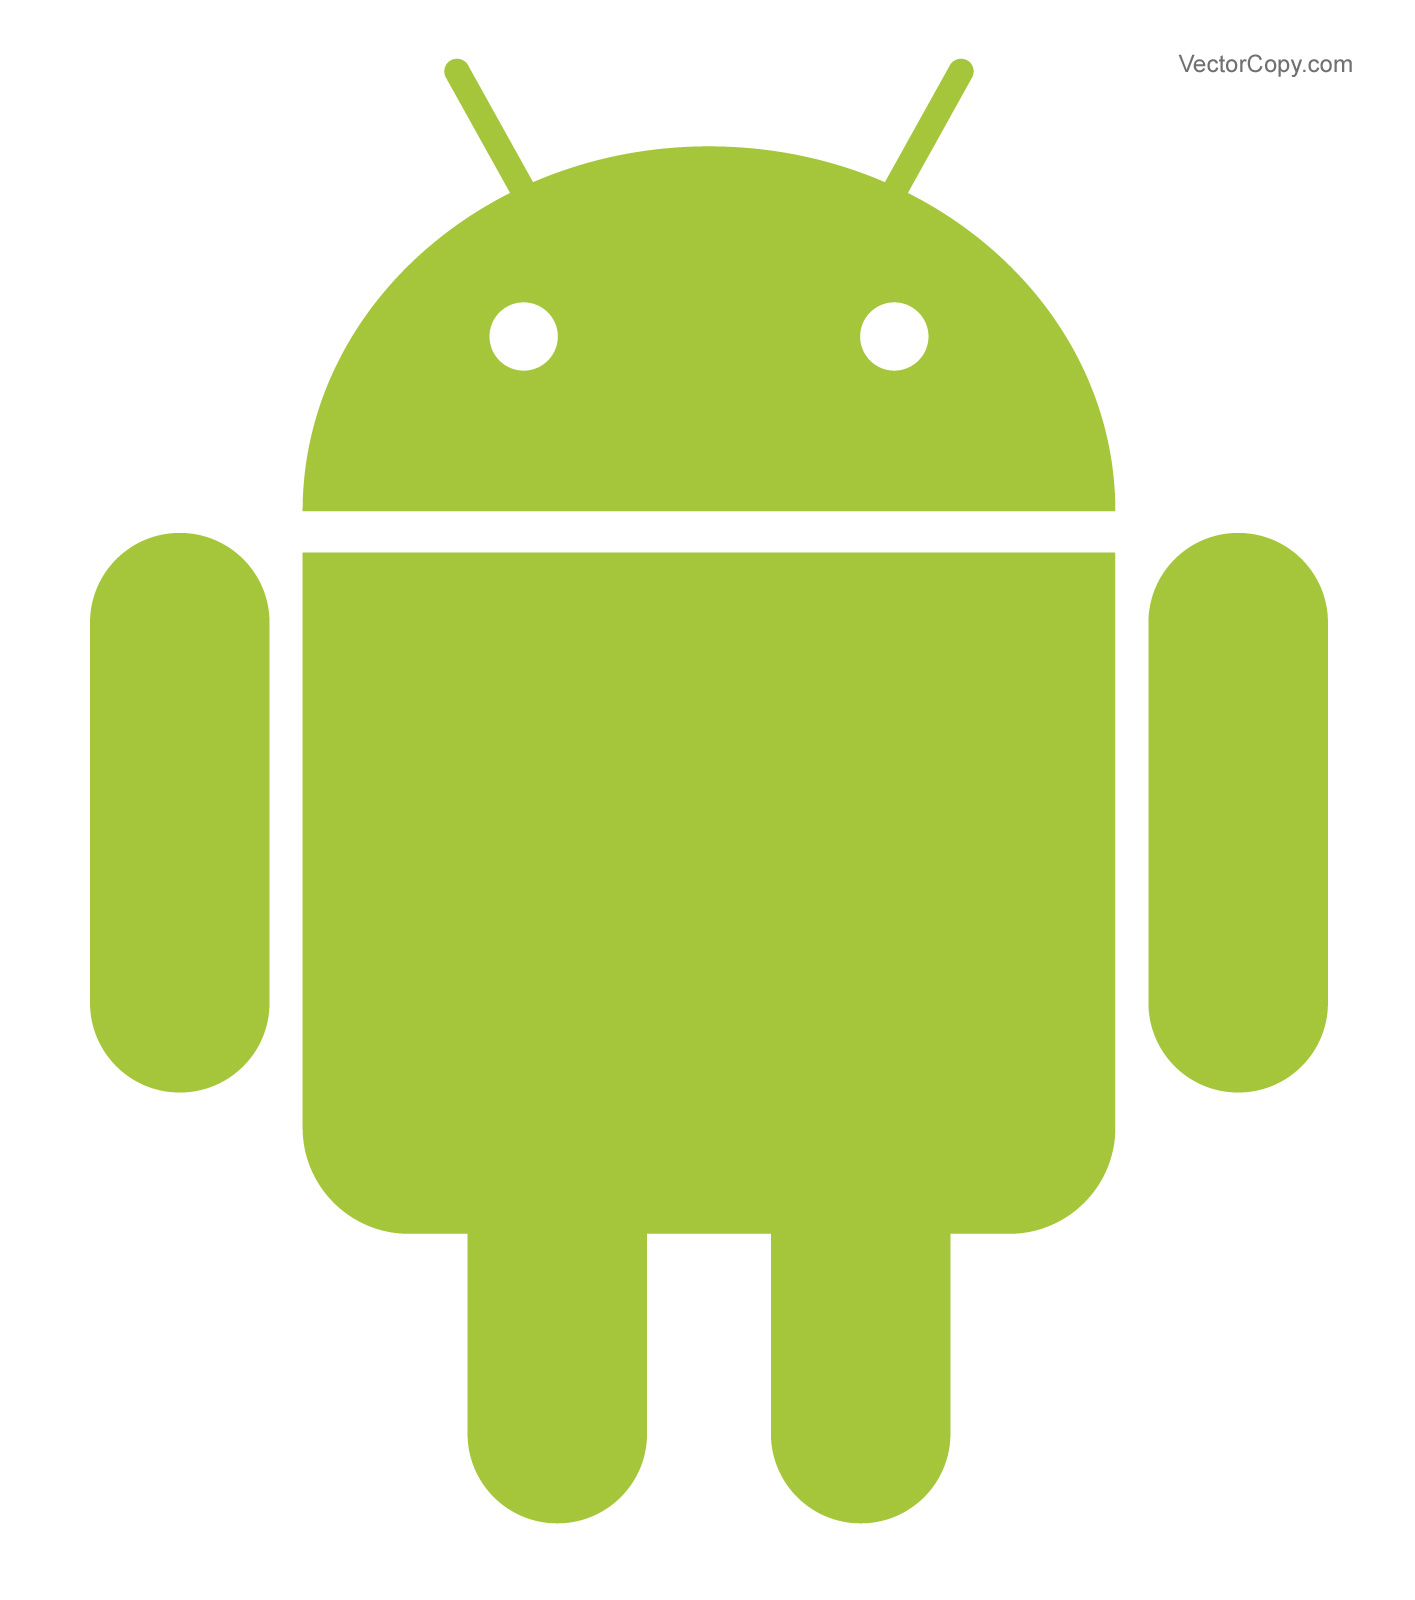 Android Logo Vector